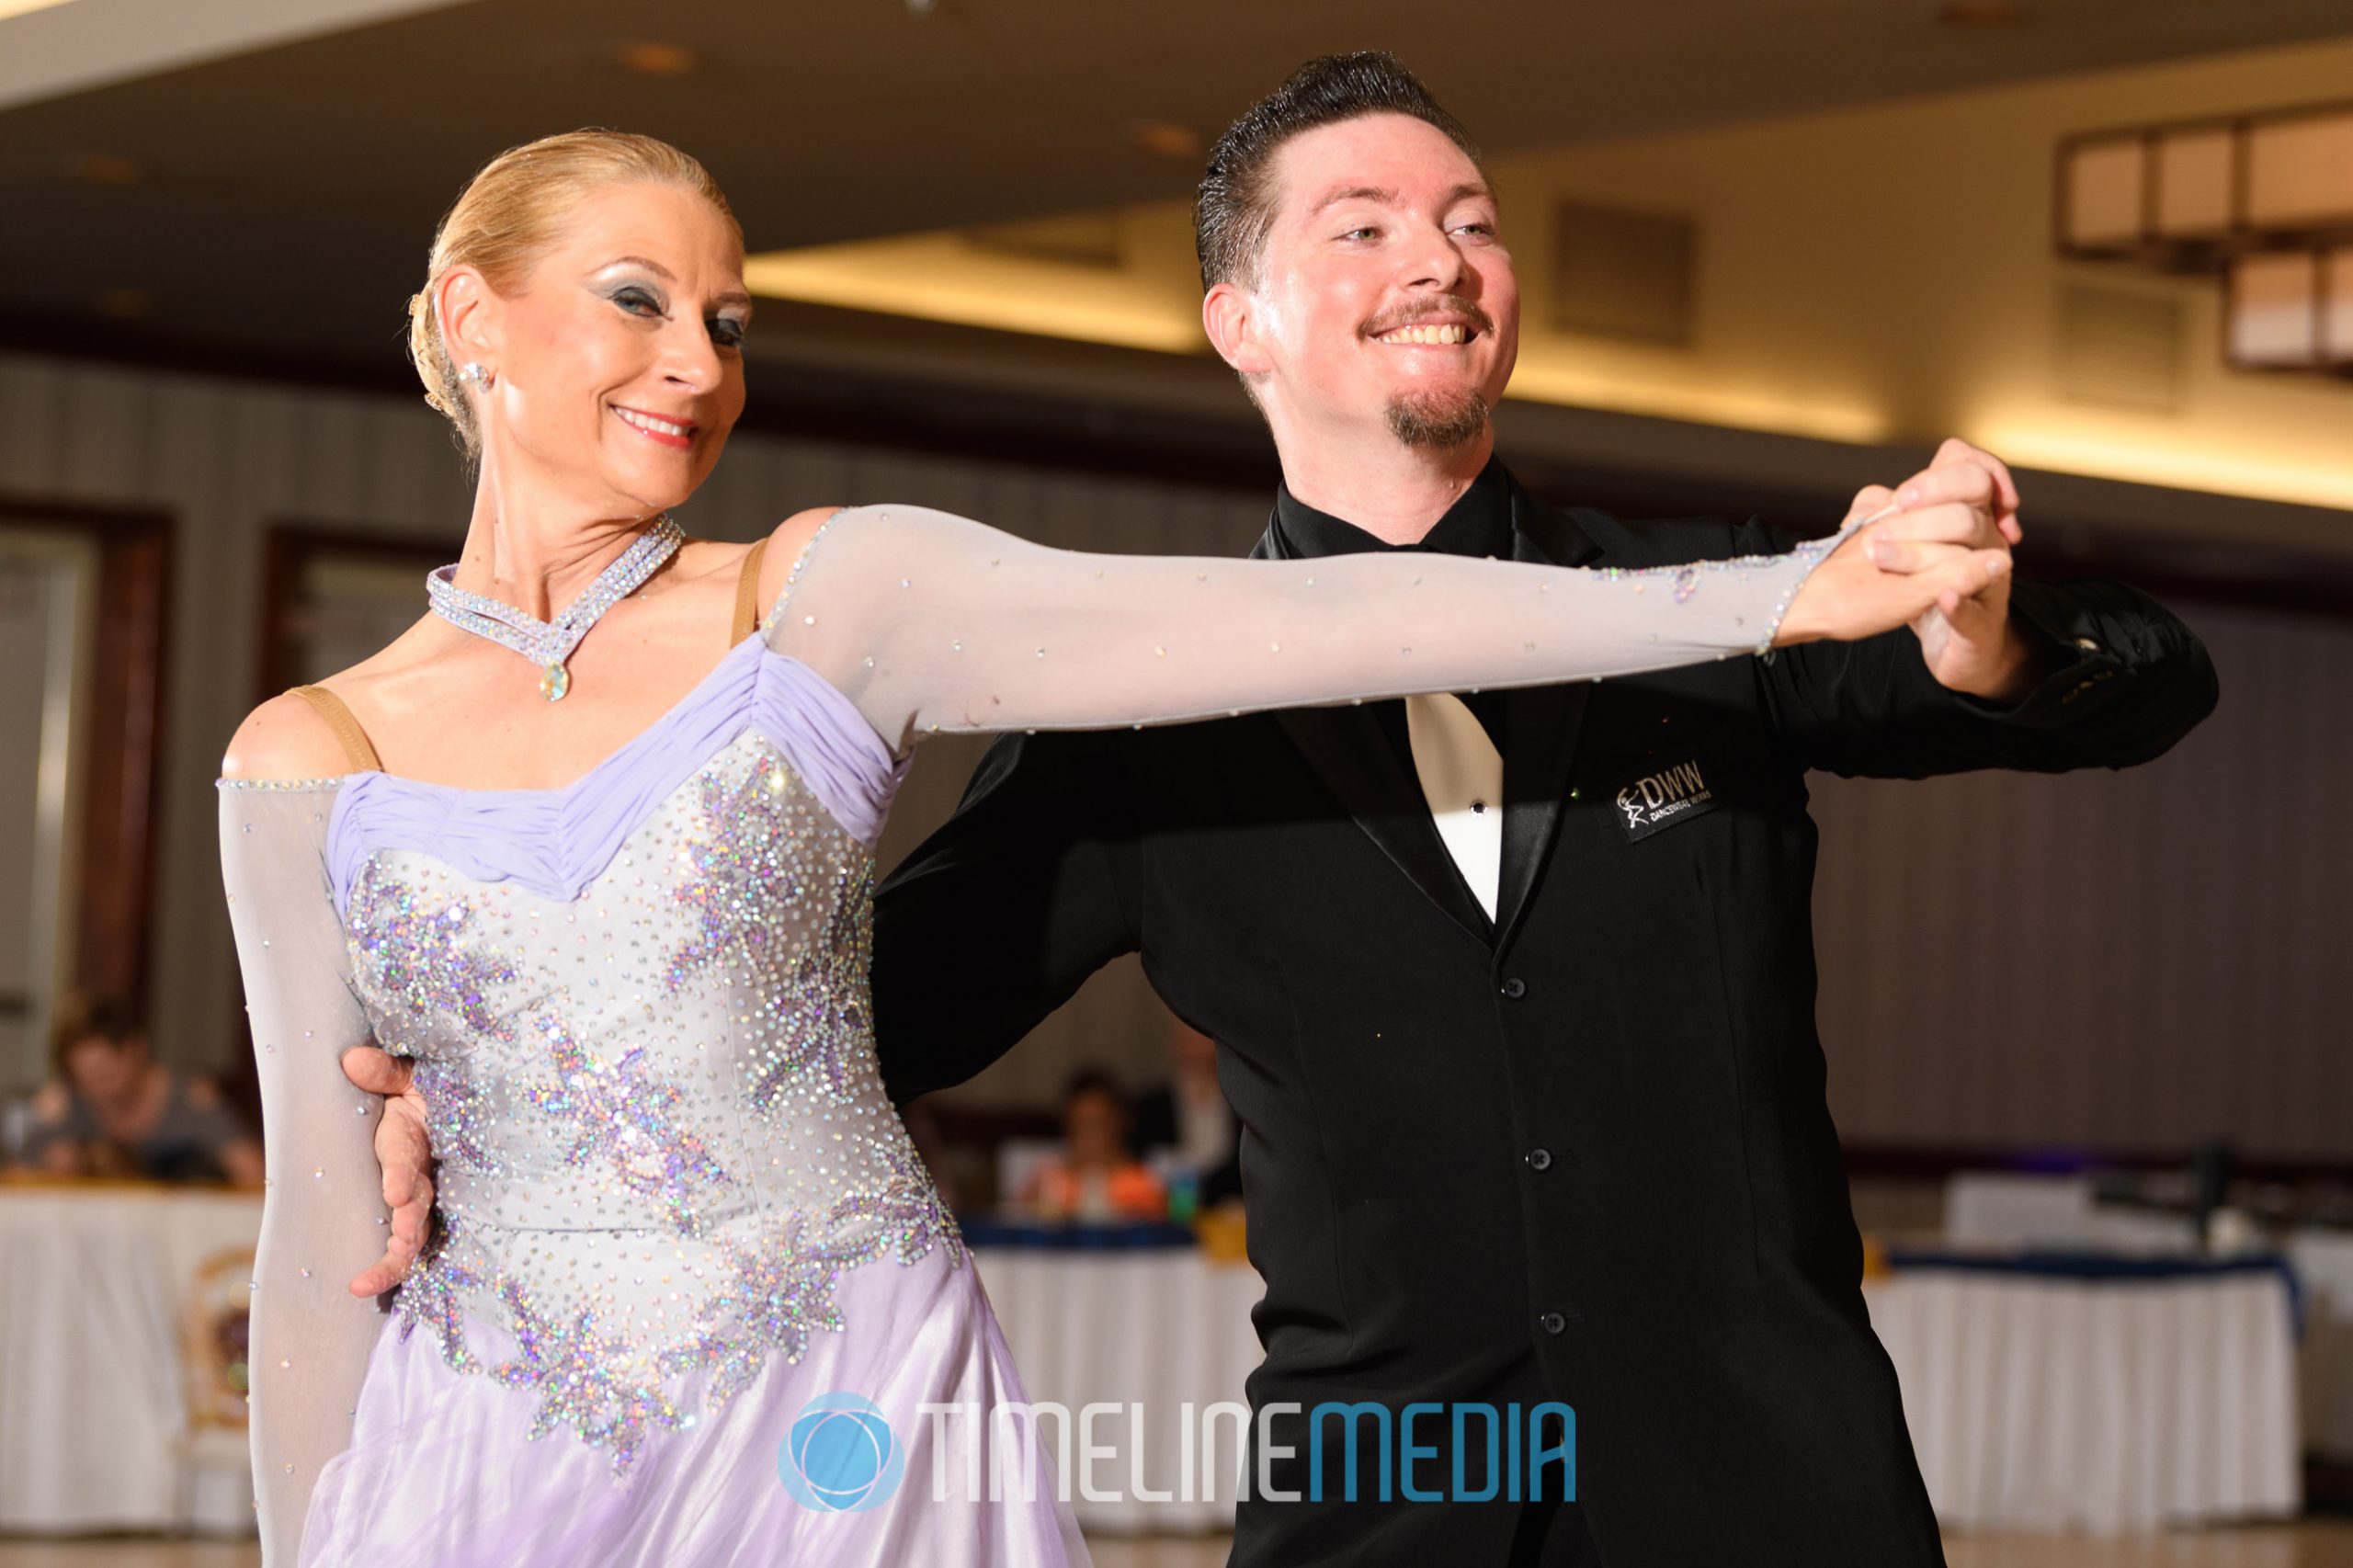 Smooth dancers at Virginia Beach dance competition ©TimeLine Media